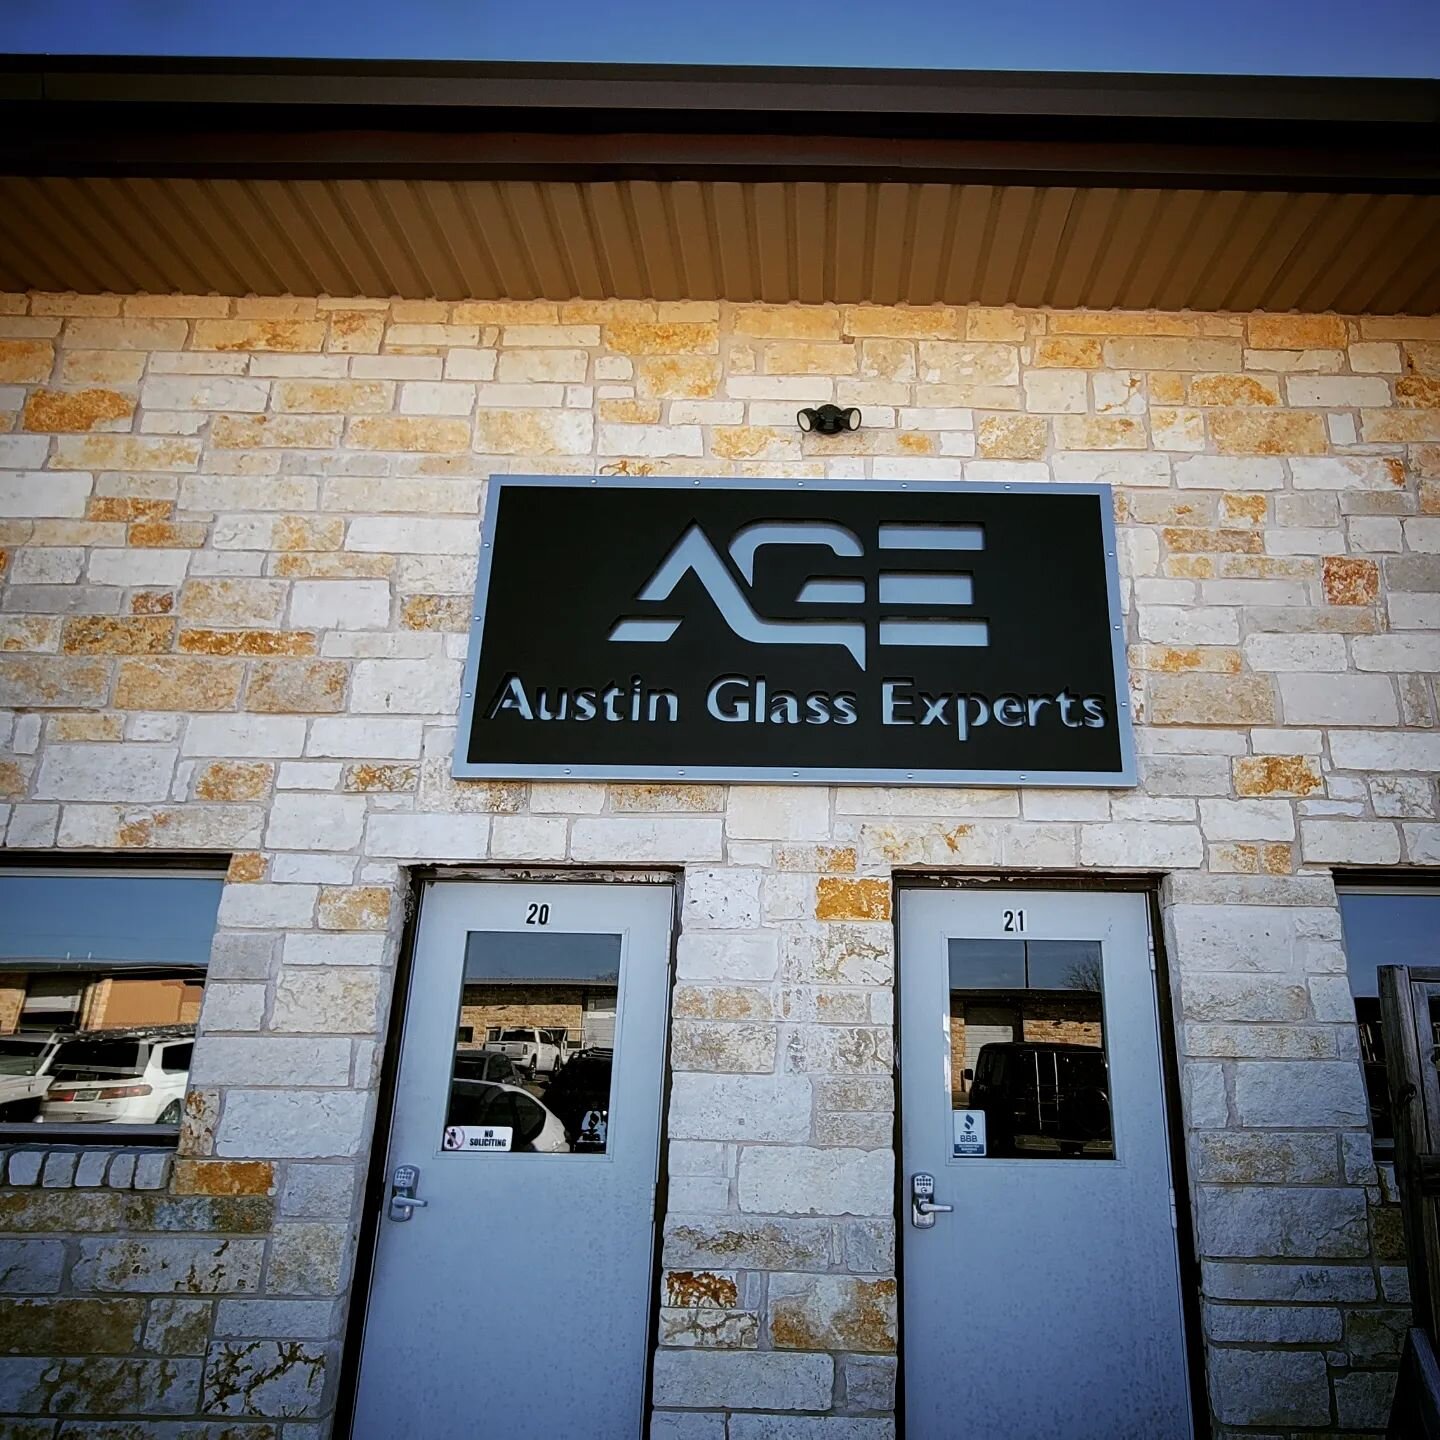 🔥Business sign for our friends @austinglassexperts 

All steel signs, contact us for a quote! @flashpointsteel 

#businesssigns #graphicdesign #steelwork #cncplasma #cnclaser #powdercoating #austintexas #roundrocktx #huttotx #businessdecor #logosign